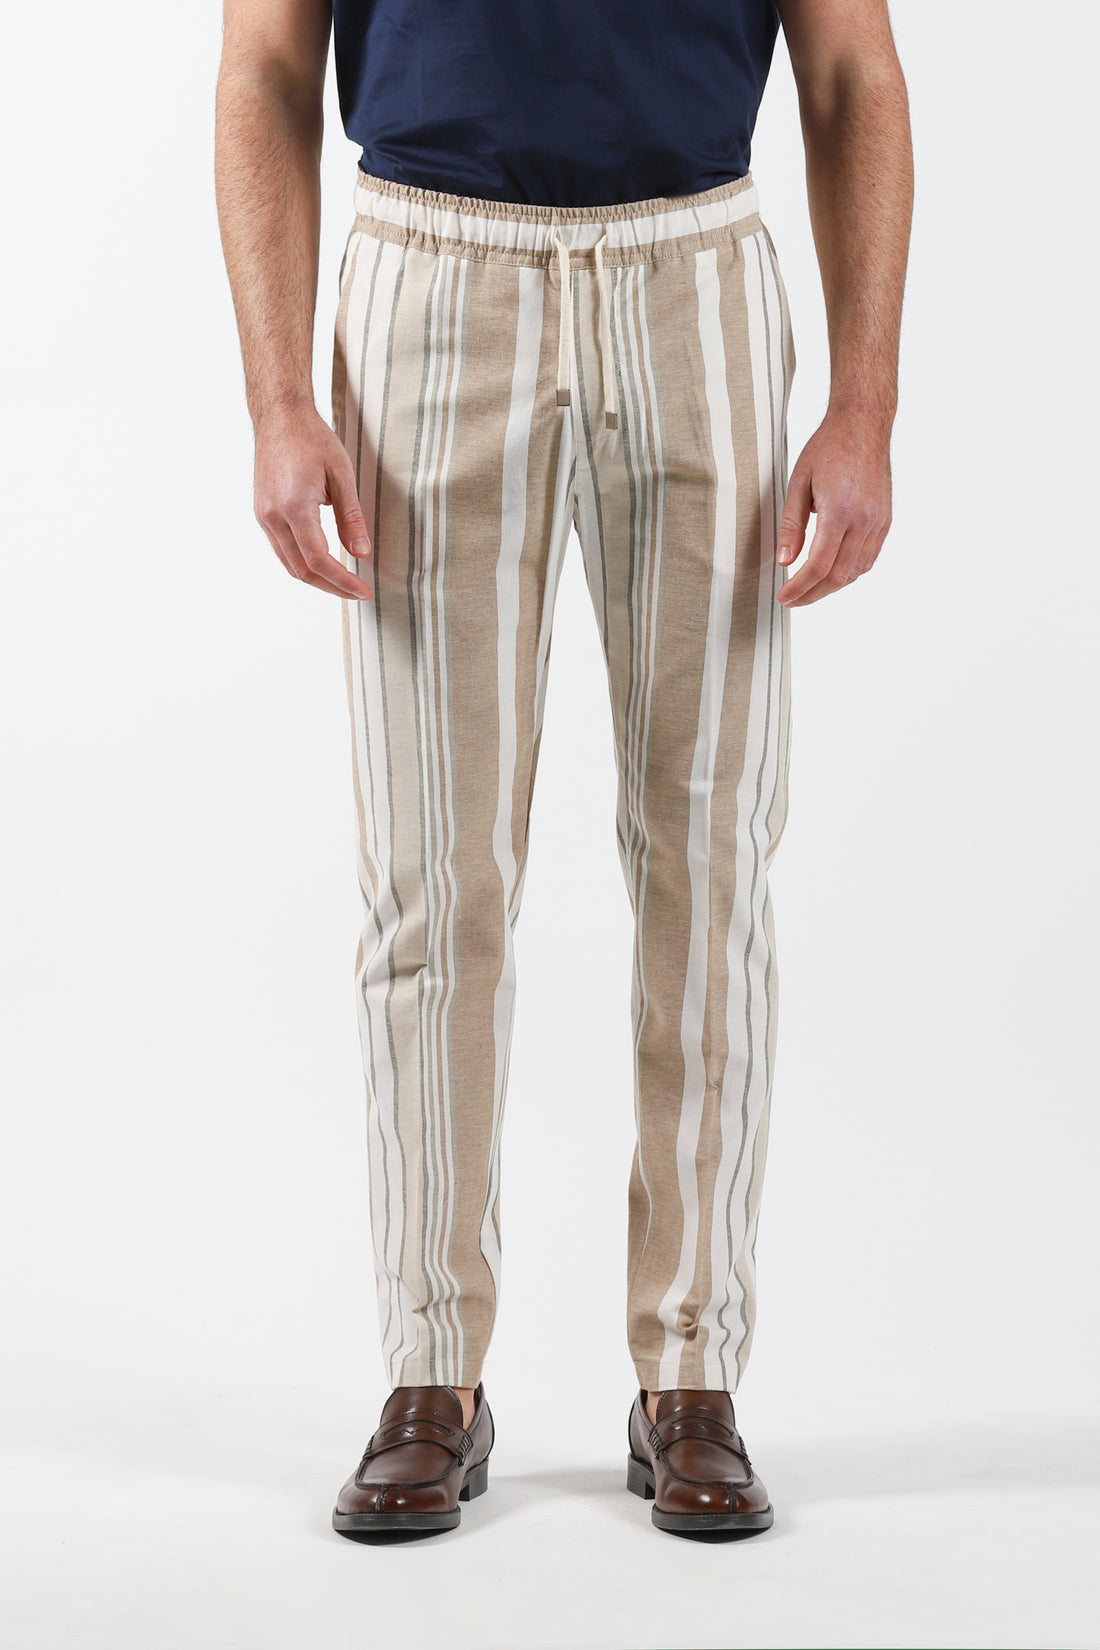 Pants in striped cotton